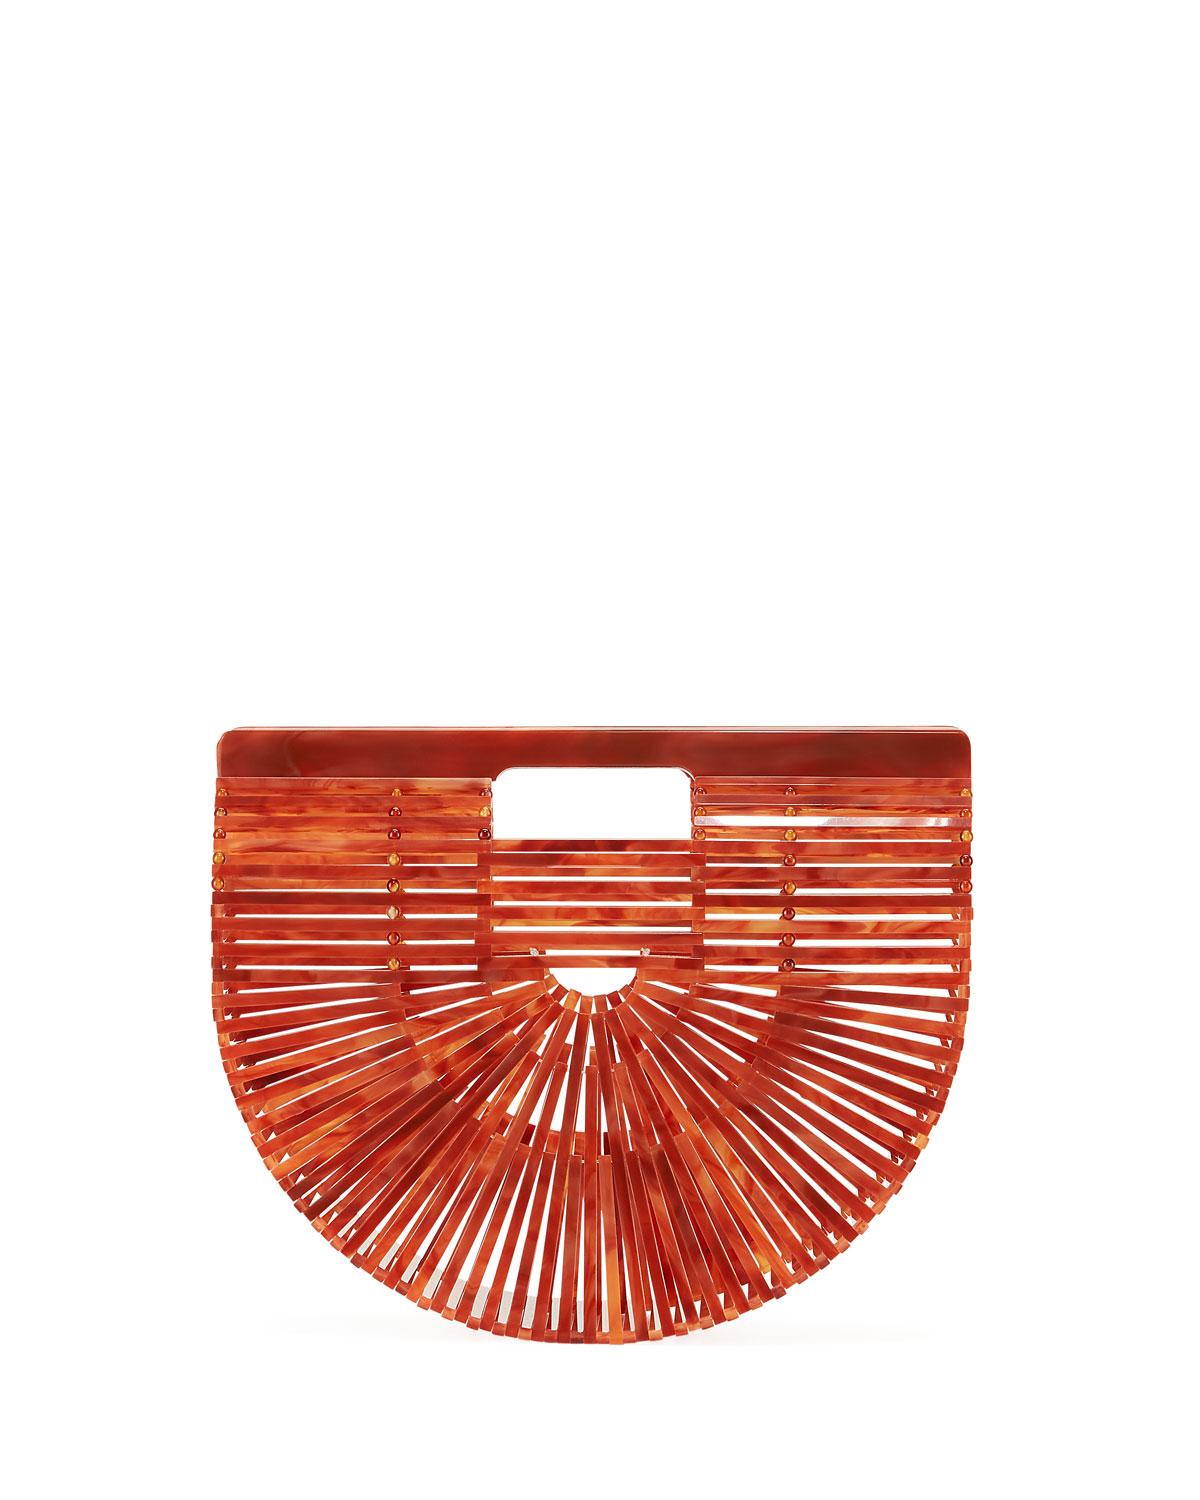 Cult Gaia Synthetic Mini Acrylic Ark Bag in Brown Pattern (Red) - Lyst